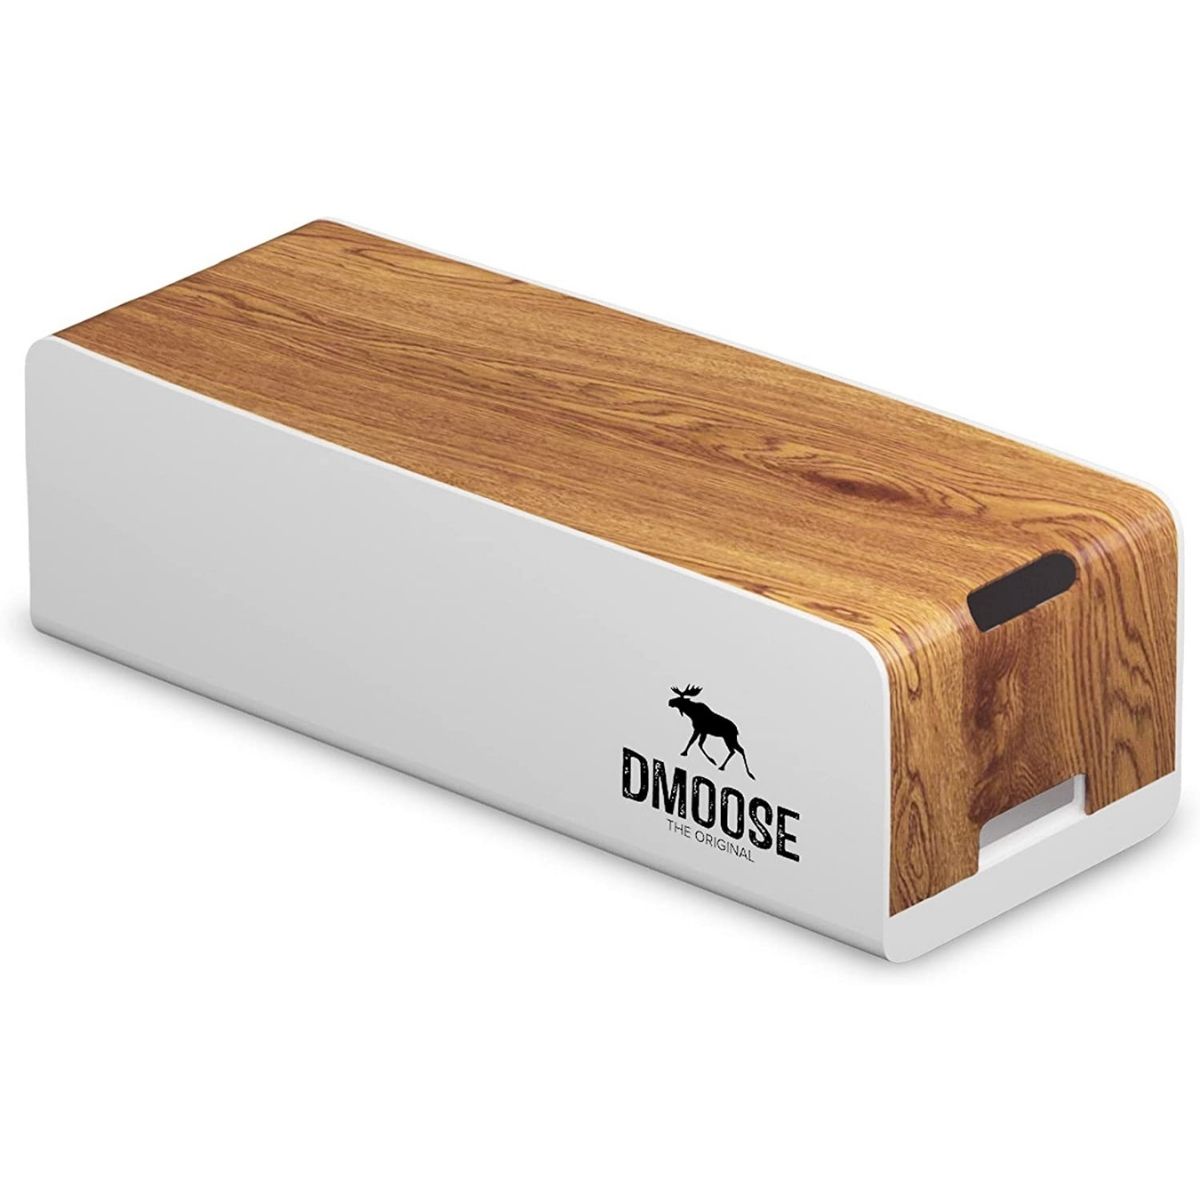 The Best Home Office Gifts Option: DMoose Cable Management Box Cord Organizer